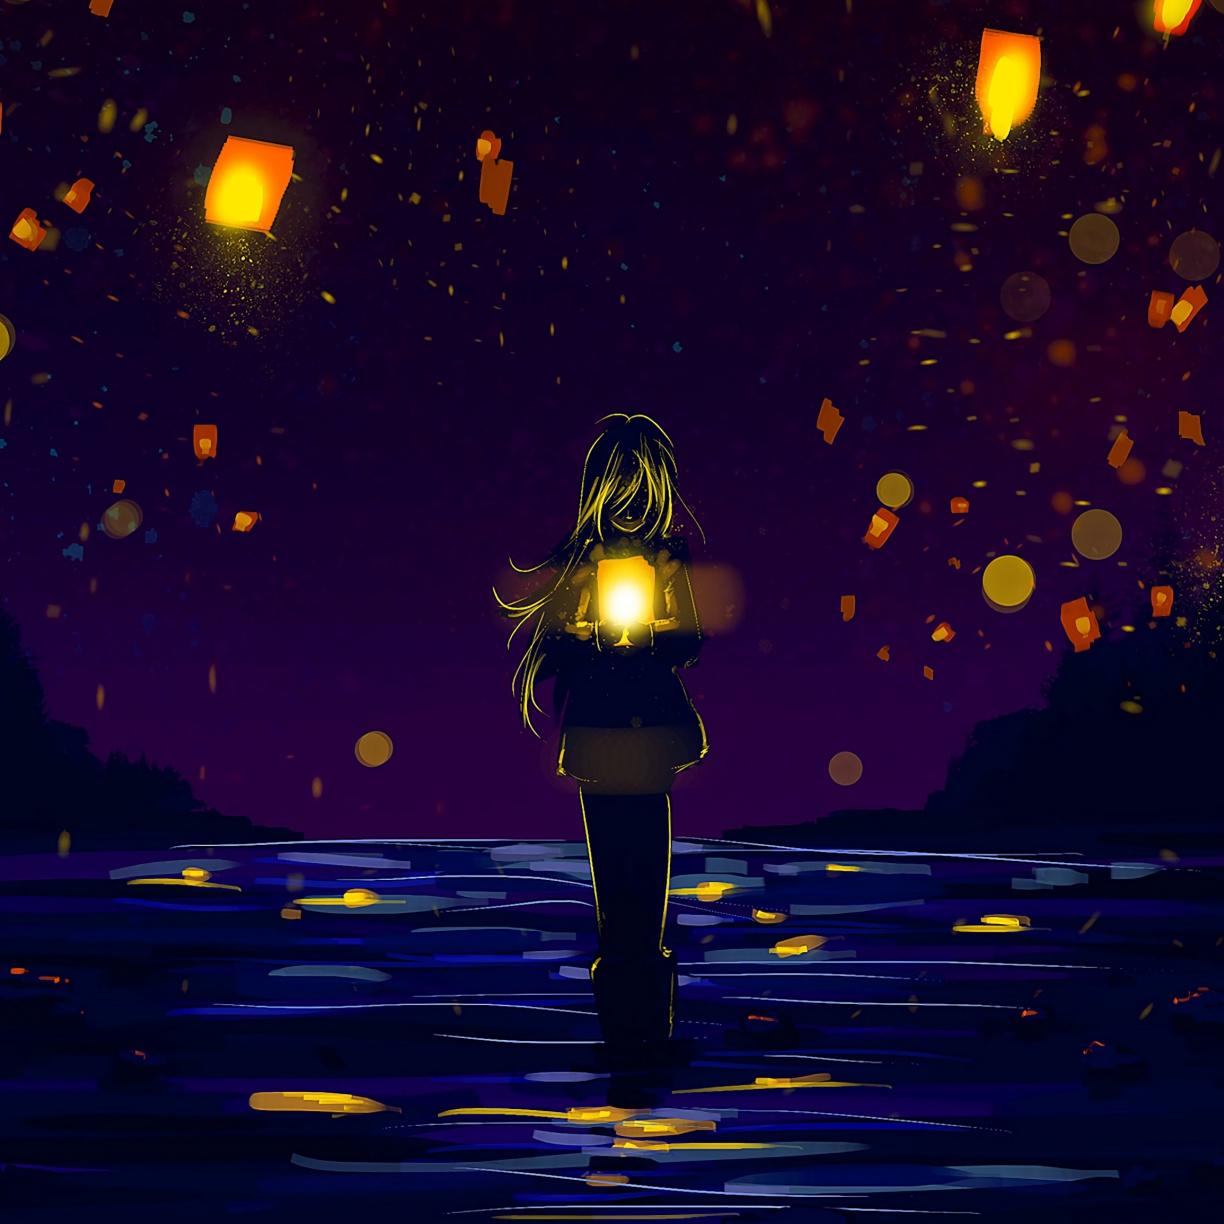 Loneliness 4k Anime Wallpapers - Wallpaper Cave